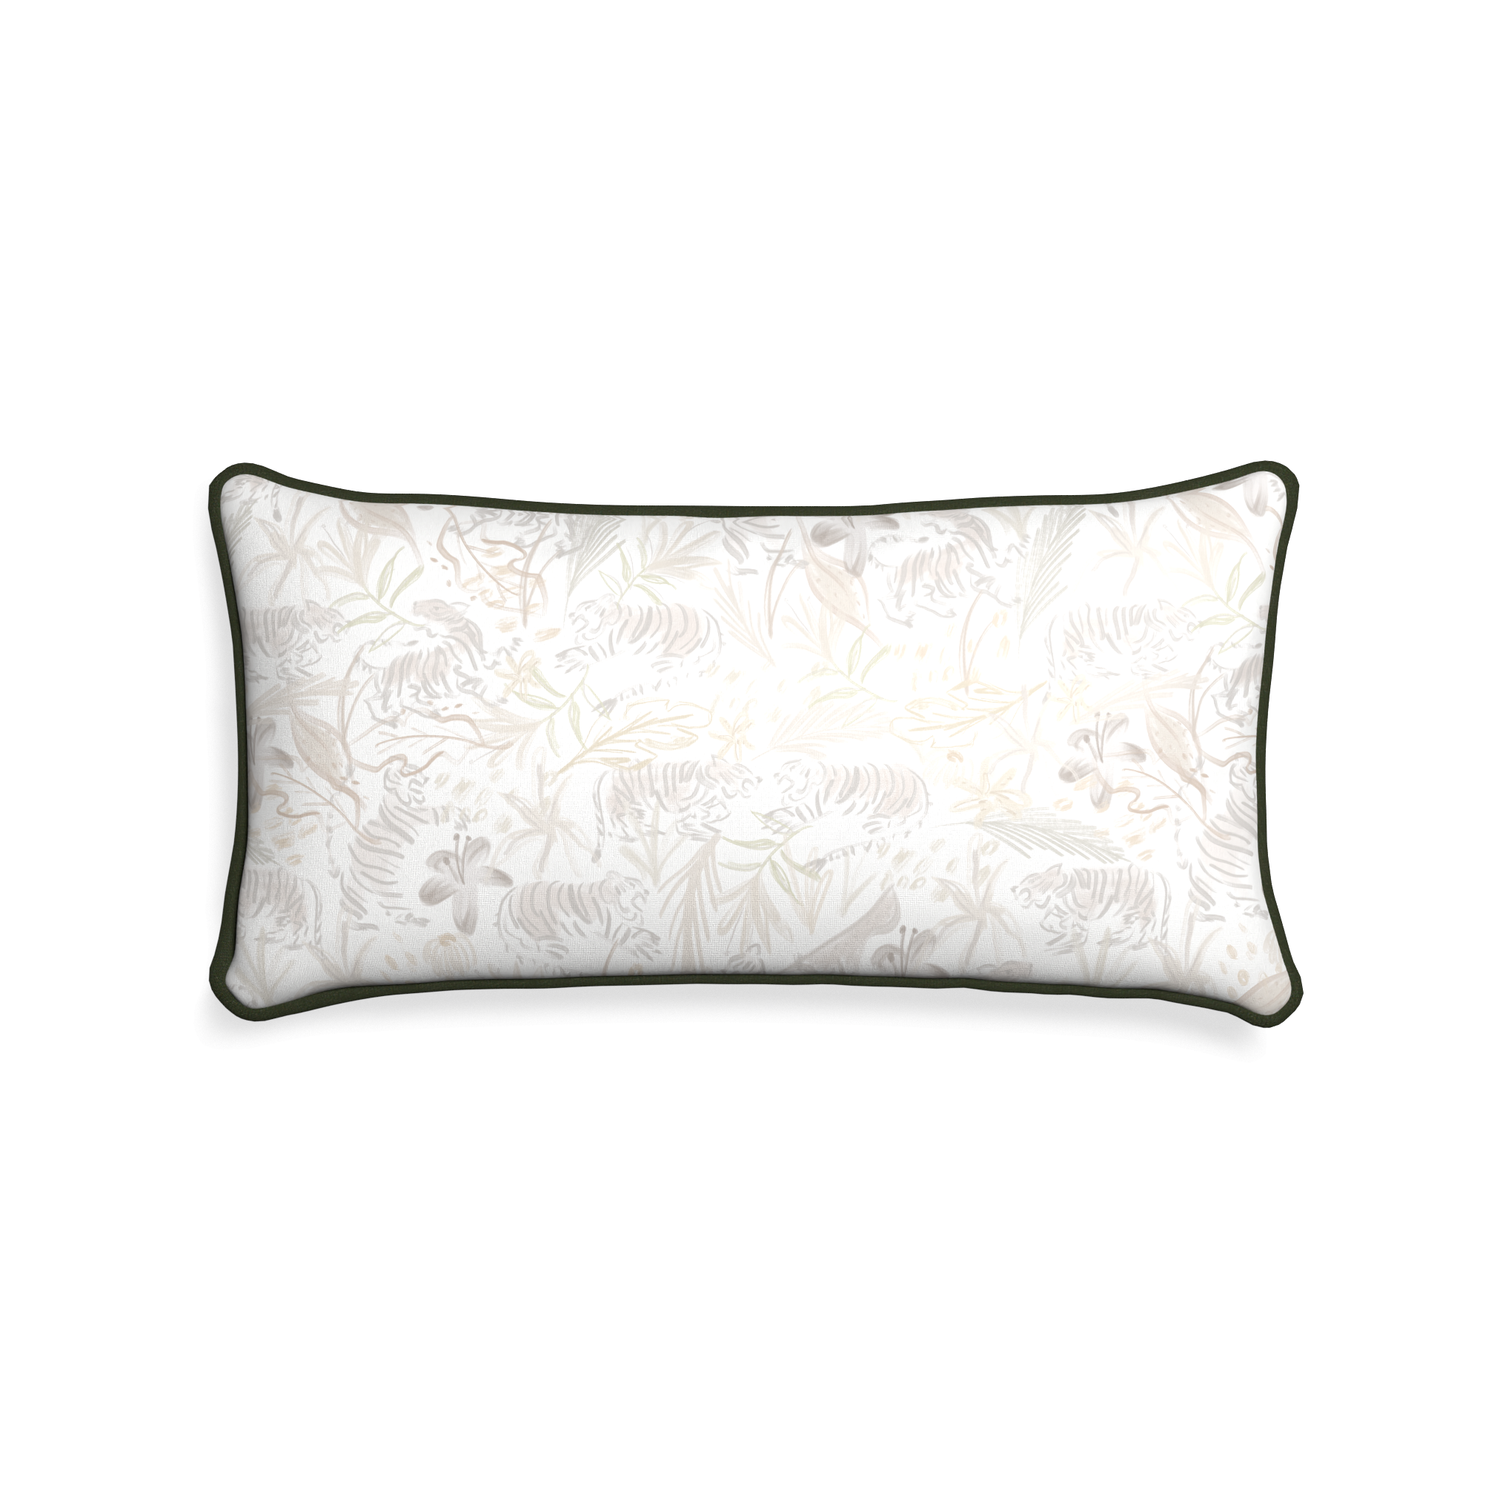 Midi-lumbar frida sand custom beige chinoiserie tigerpillow with f piping on white background